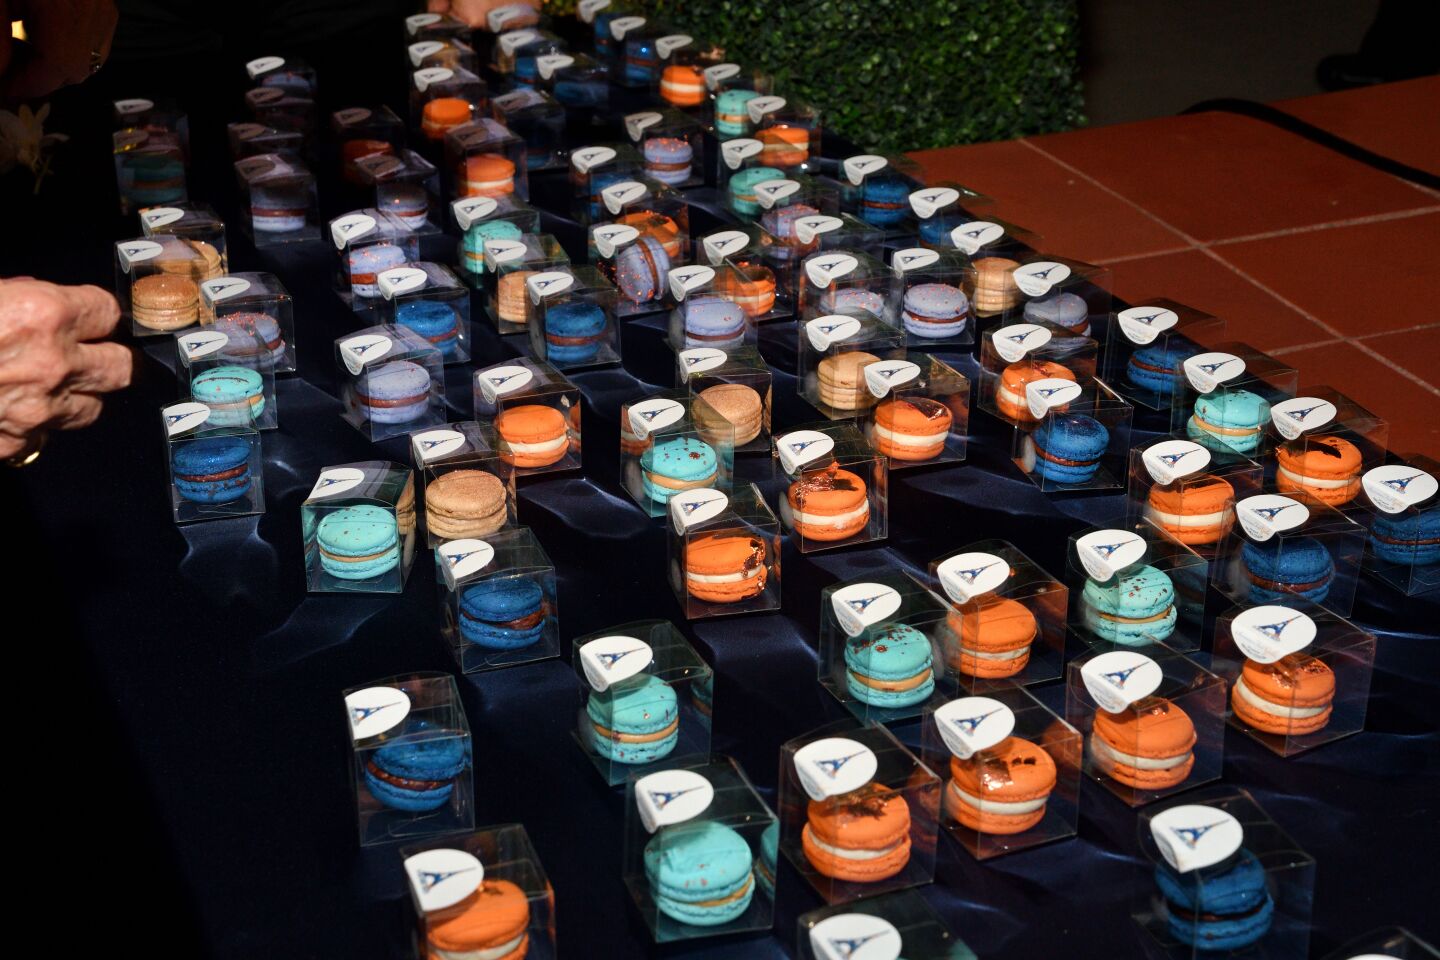 French macarons wait for SummerFest Gala guests to take them home.